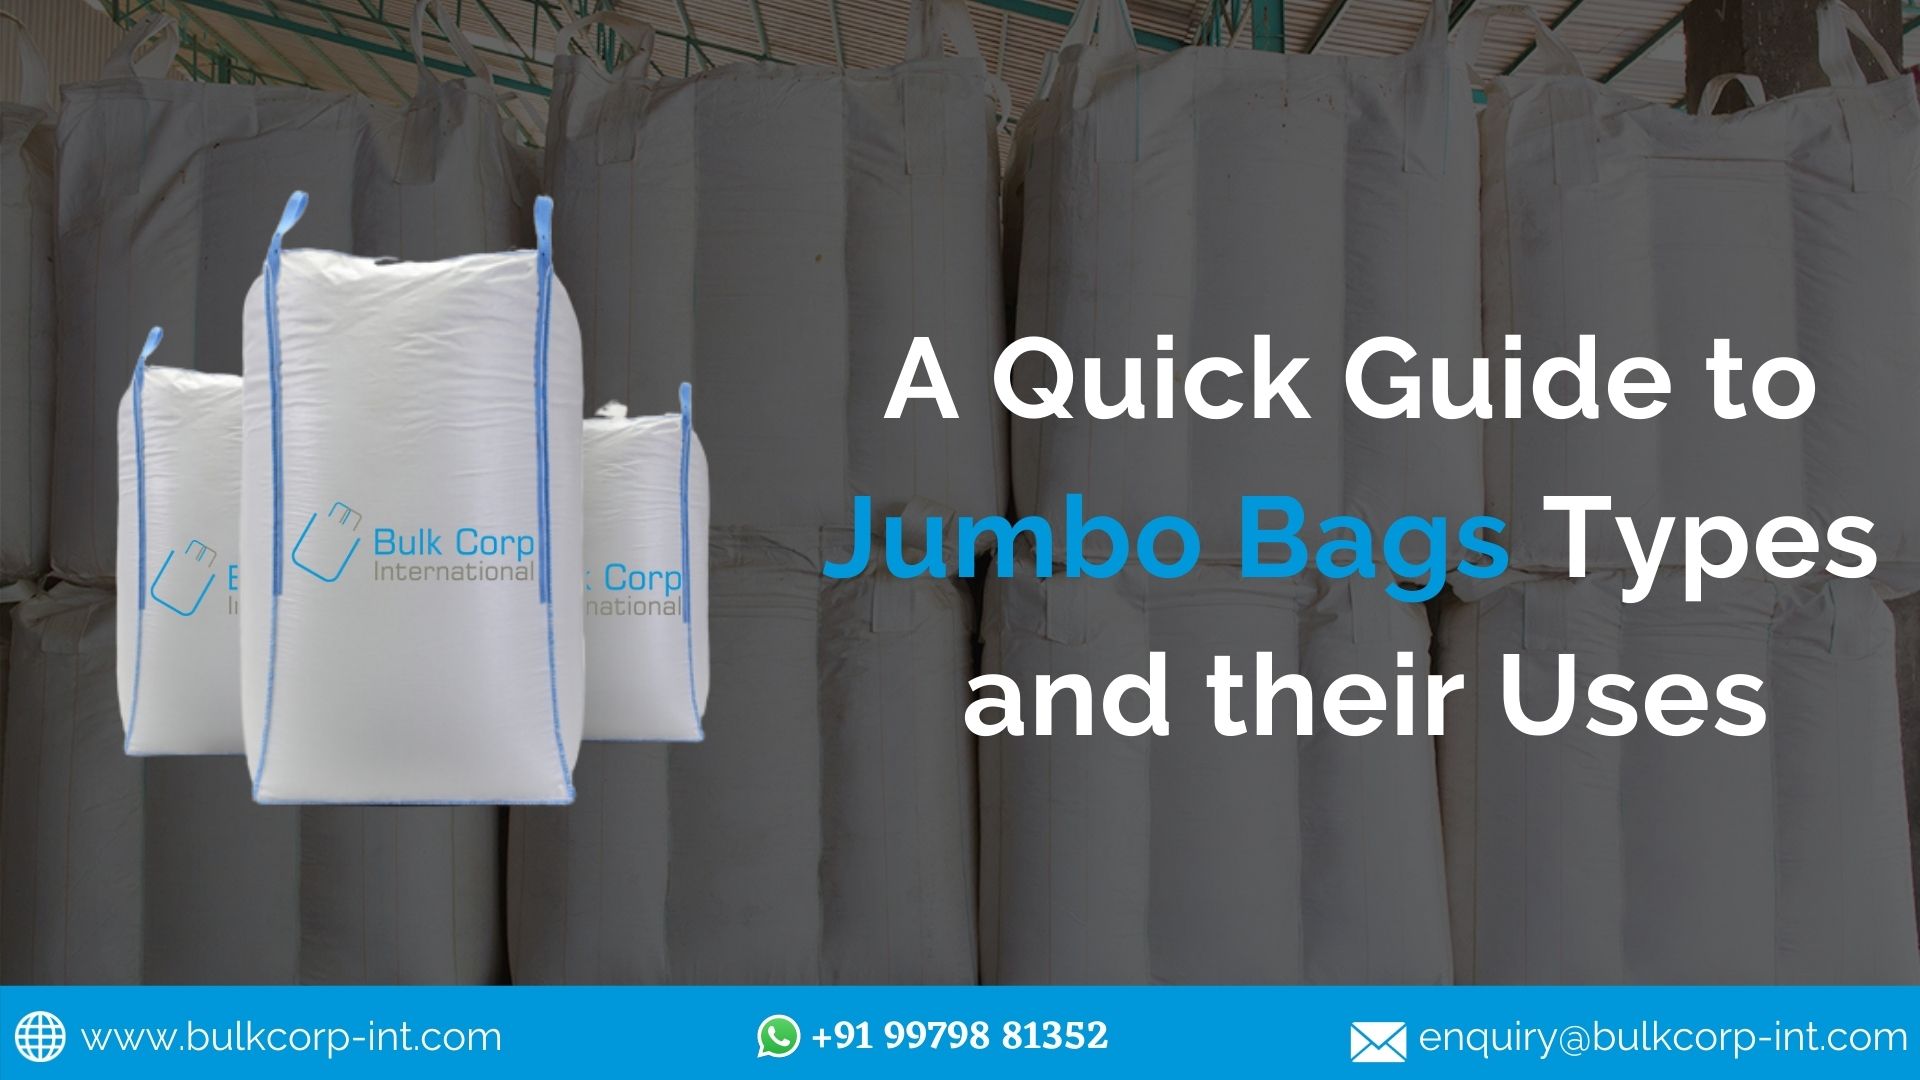 https://www.bulkcorp-int.com/blog/wp-content/uploads/2020/09/A-Quick-Guide-to-Jumbo-Bags-Types-and-their-Uses.jpg